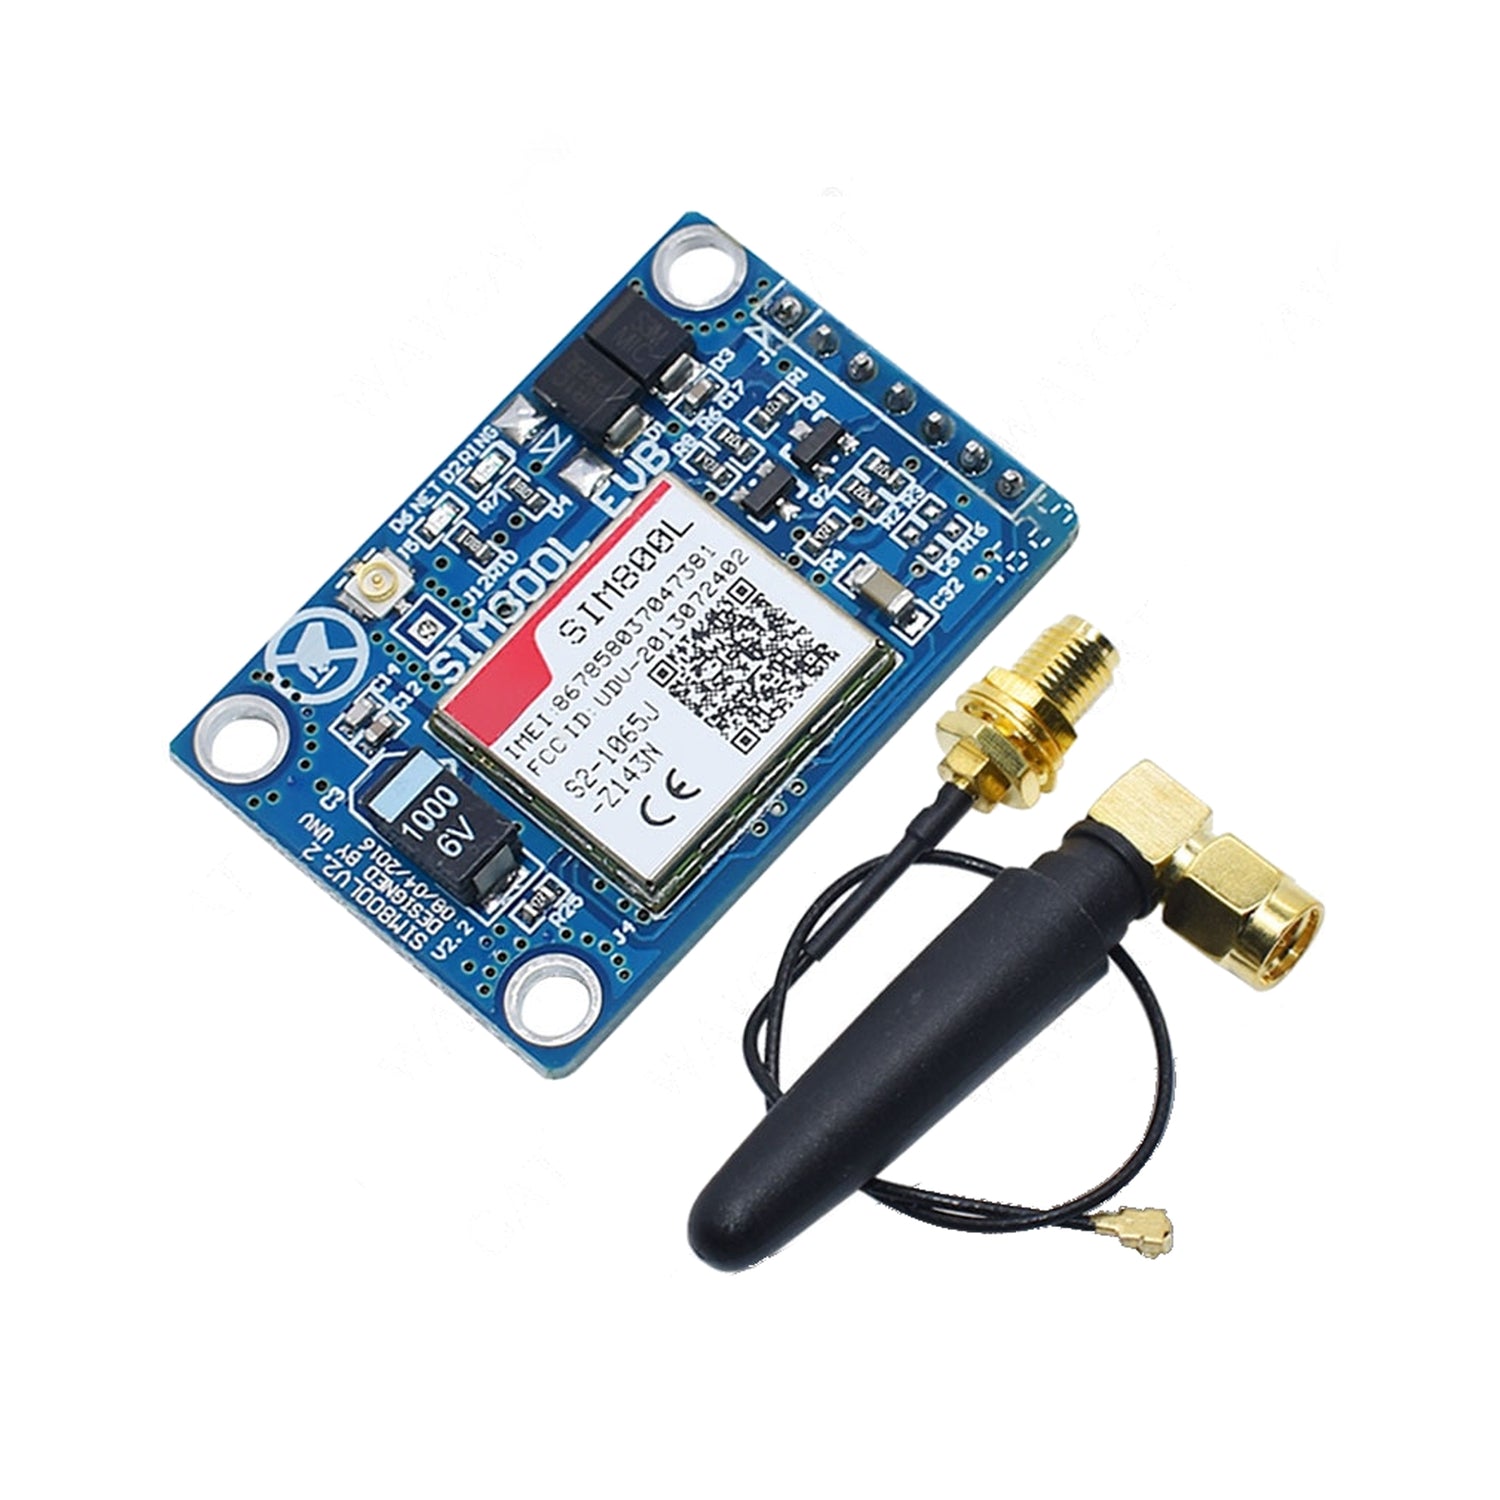 GSM GPRS Module SIM800L V2.0 5V Wireless GSM GPRS Module Quad-Band W/ Antenna Cable Cap M105 - RS1068/RS4079 - REES52